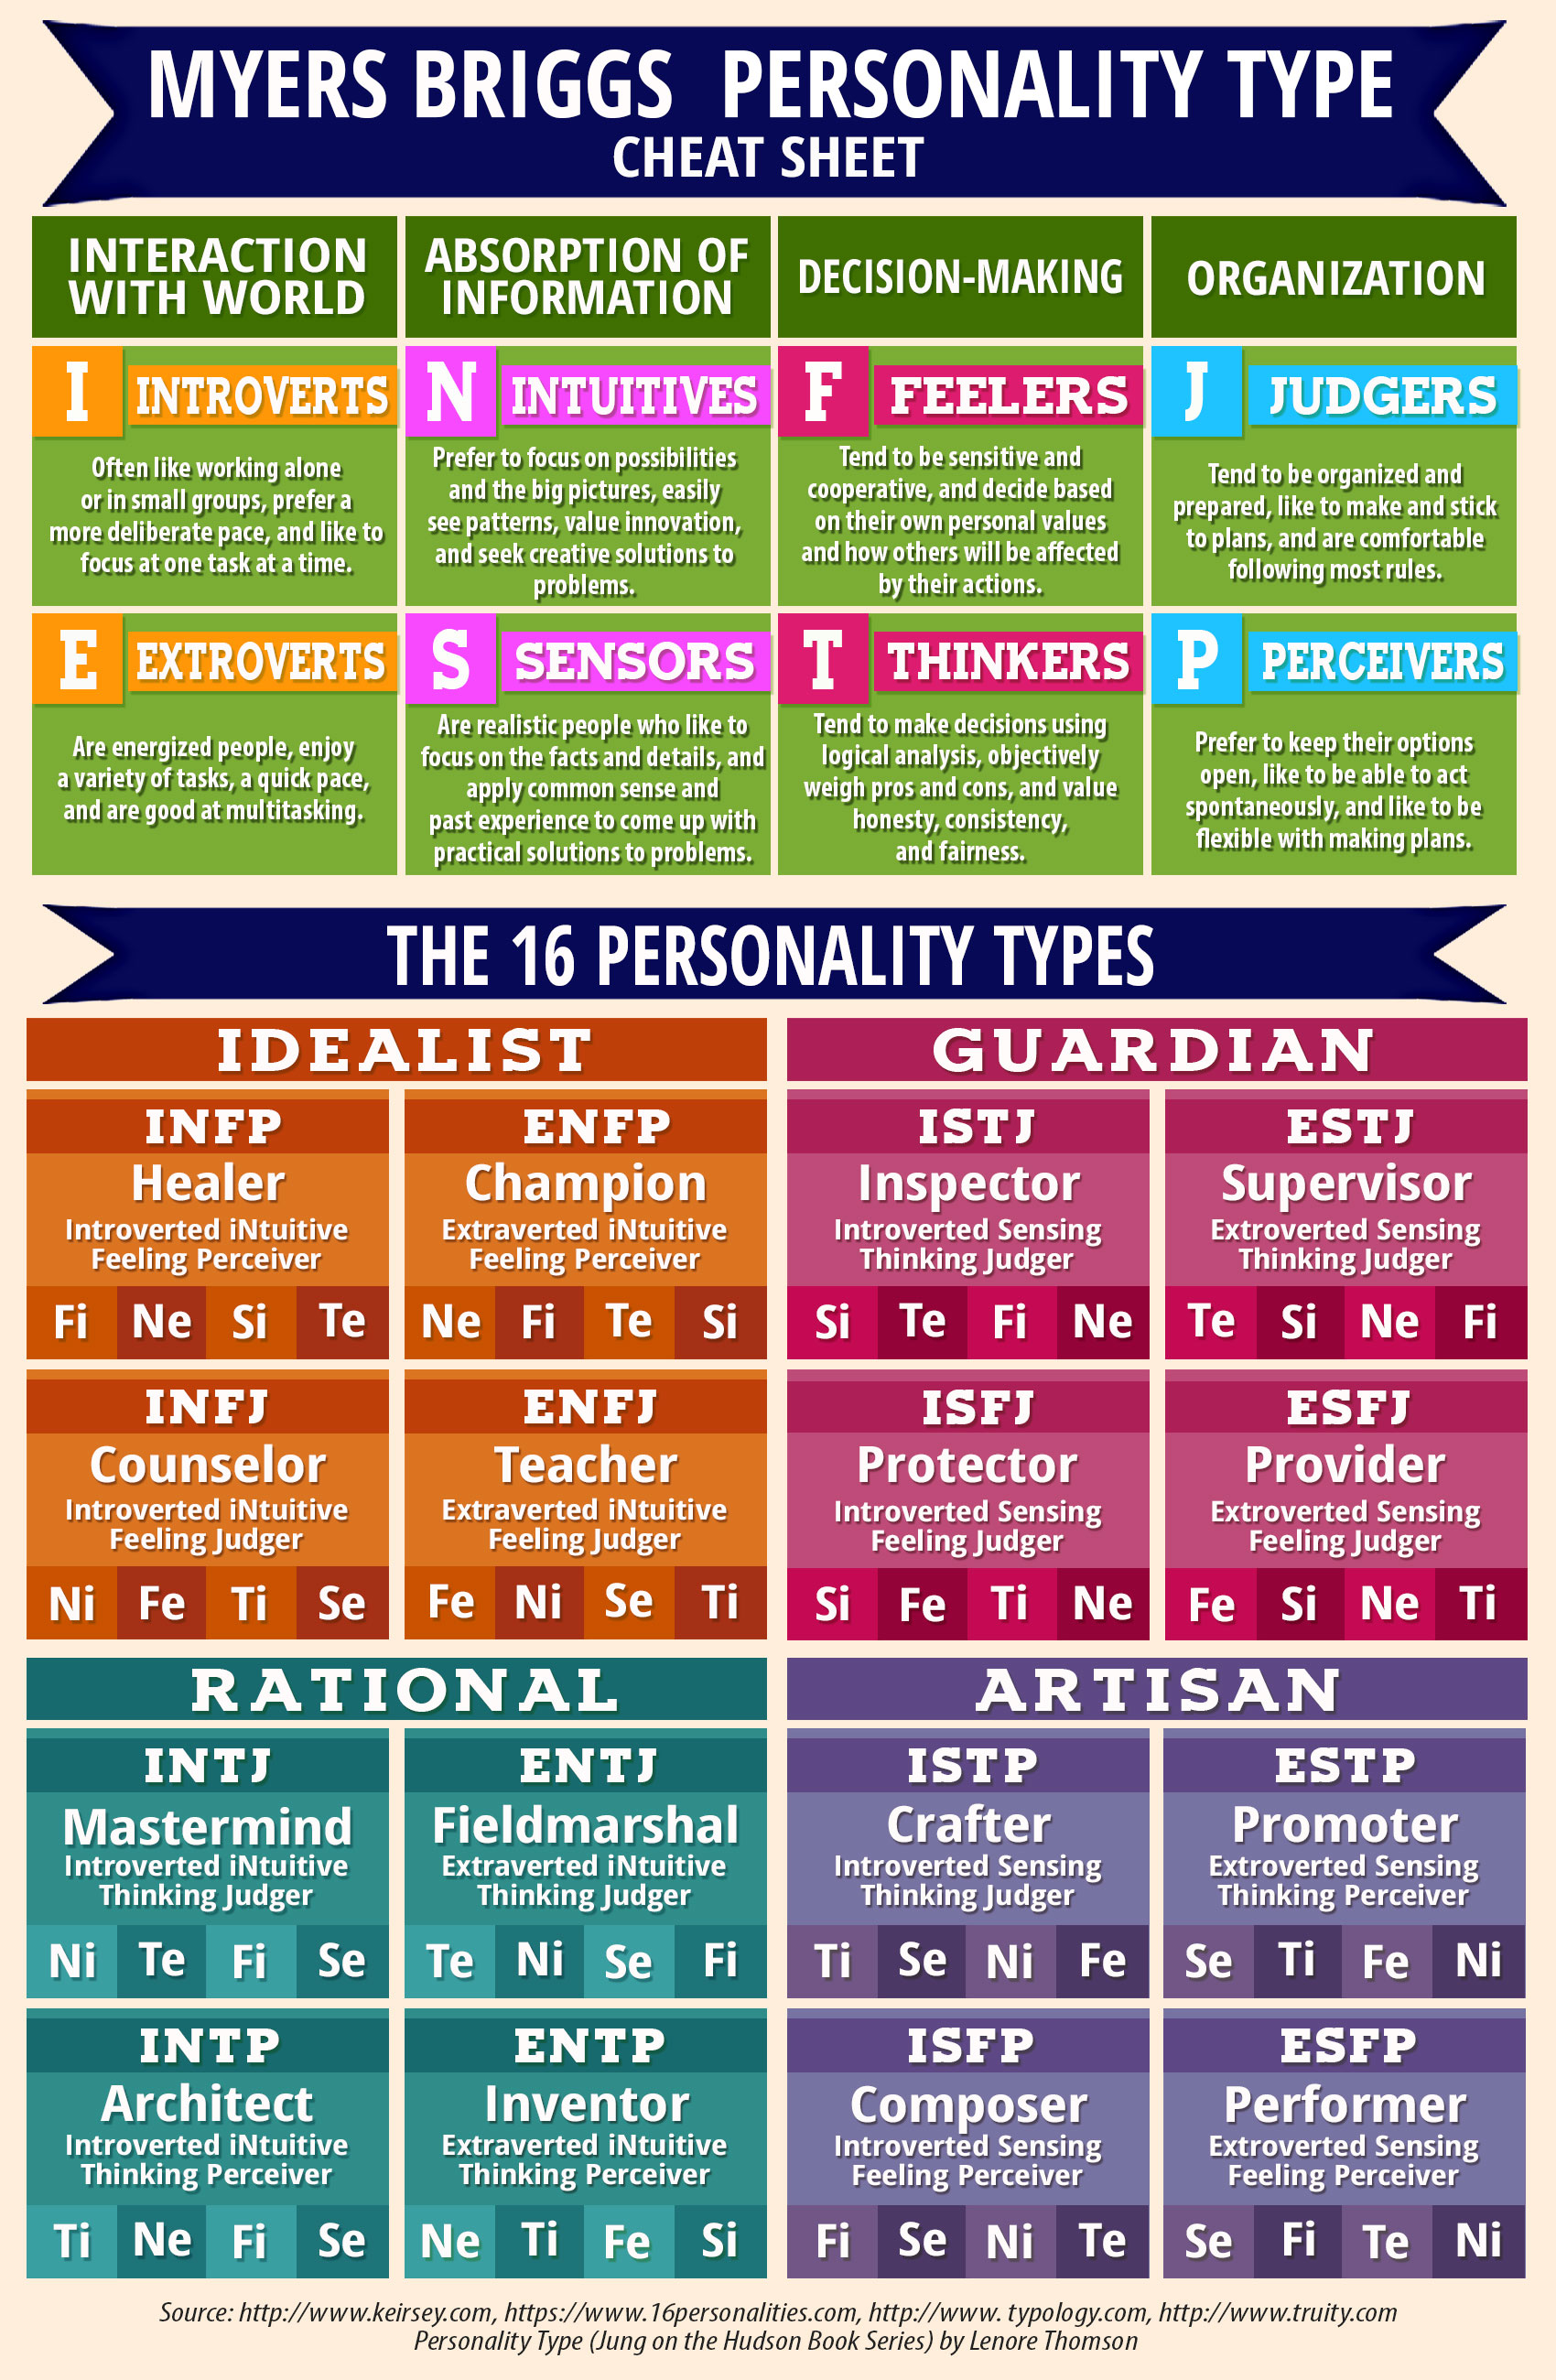 image-typologycentral-myers-briggs-personality-type-cheat-sheet-jpg-please-teacher-wiki